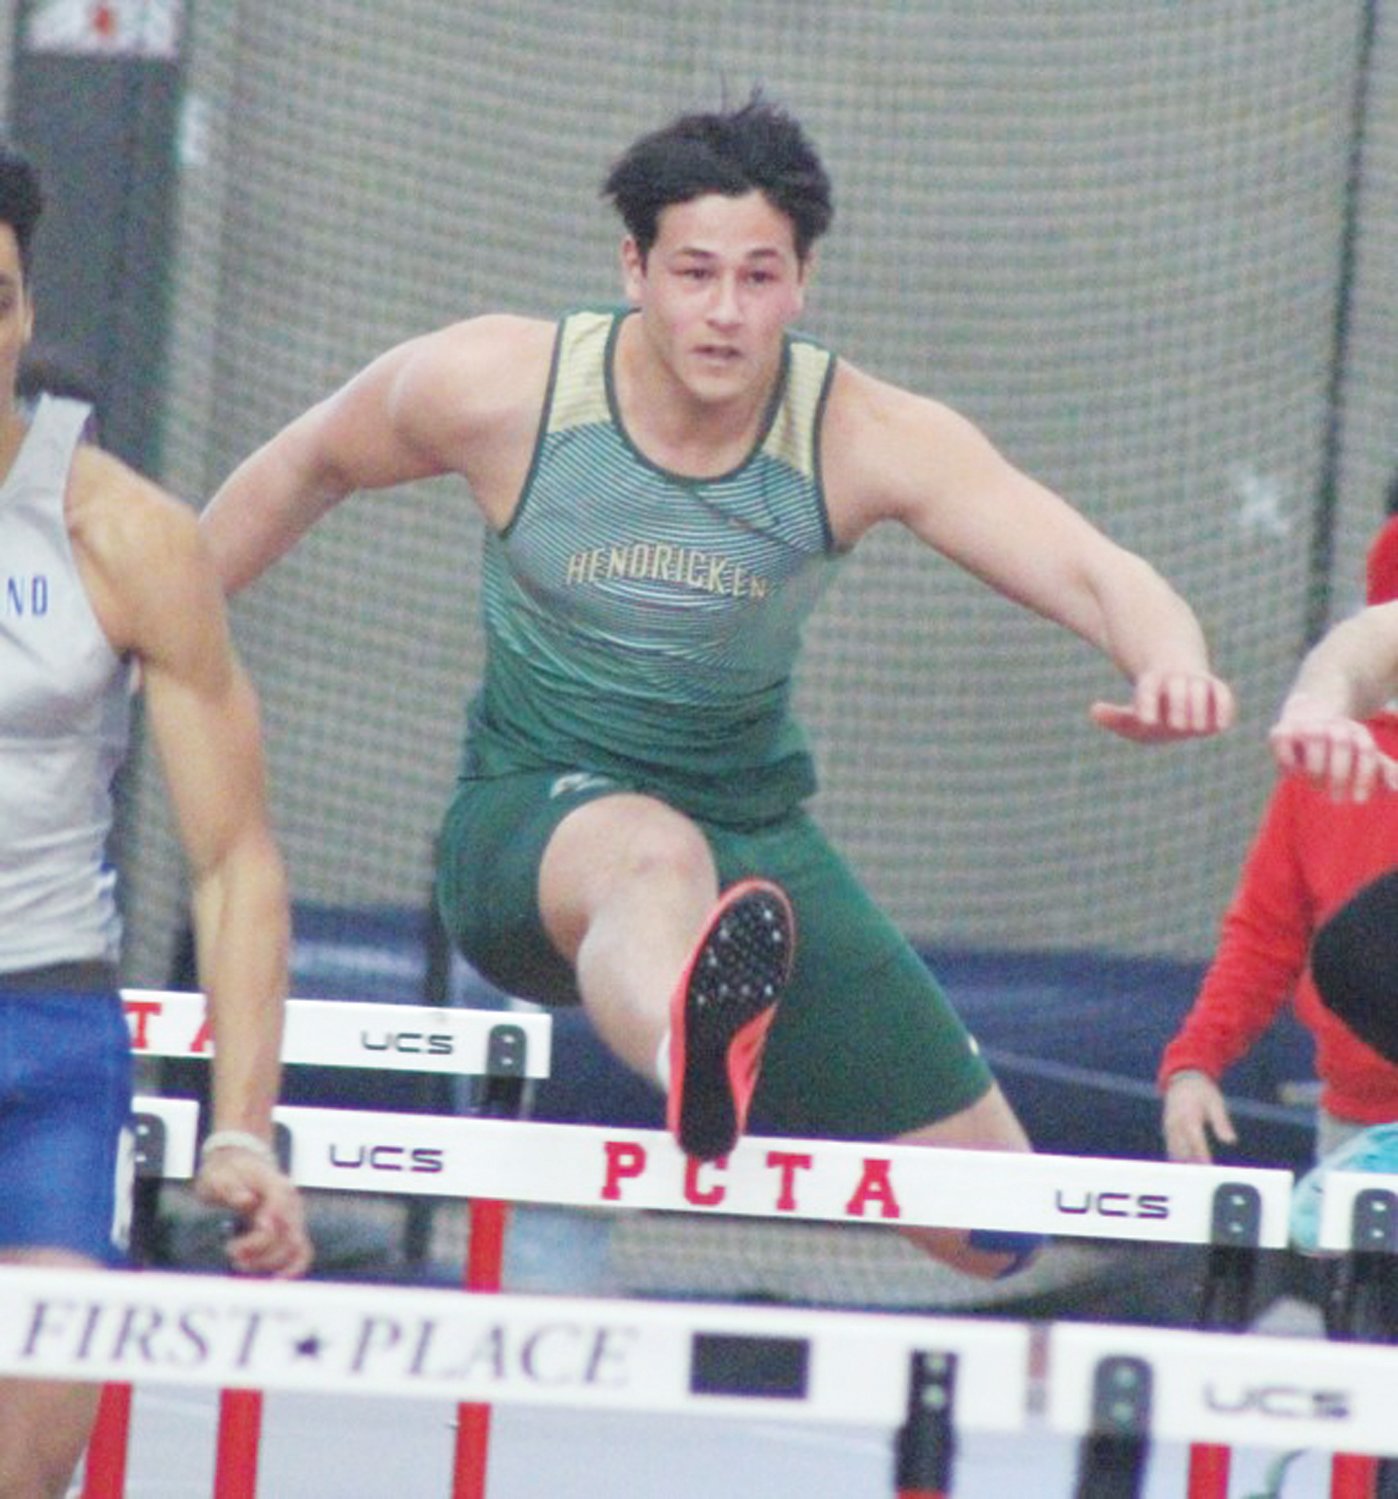 HURDLES: Bishop Hendricken’s Josiah Nhar competes in the 55 meter hurdles on Saturday afternoon at the RIIL Indoor Track & Field Class Championships. Nhar finished in sixth place in the event and the Hawks would go on to win the team title. (Photos by Alex Sponseller)